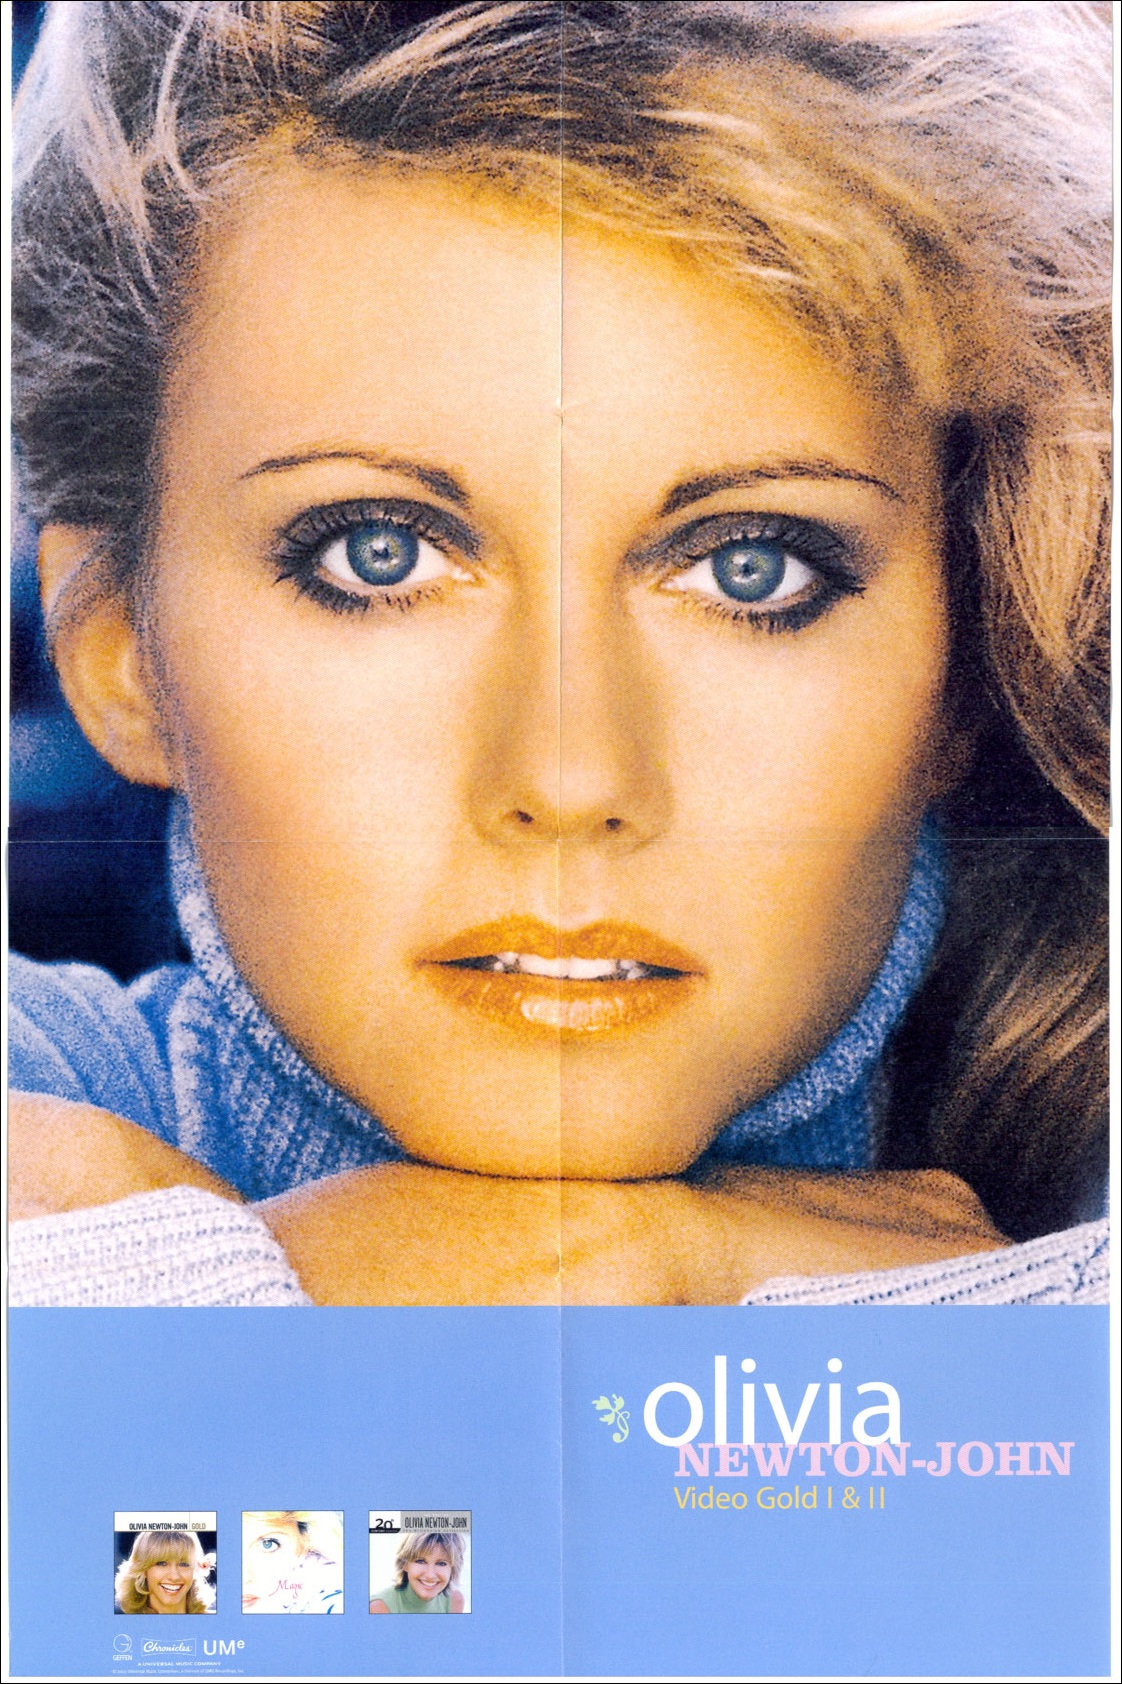 Poster of Olivia Newton-John from Gold DVD release.